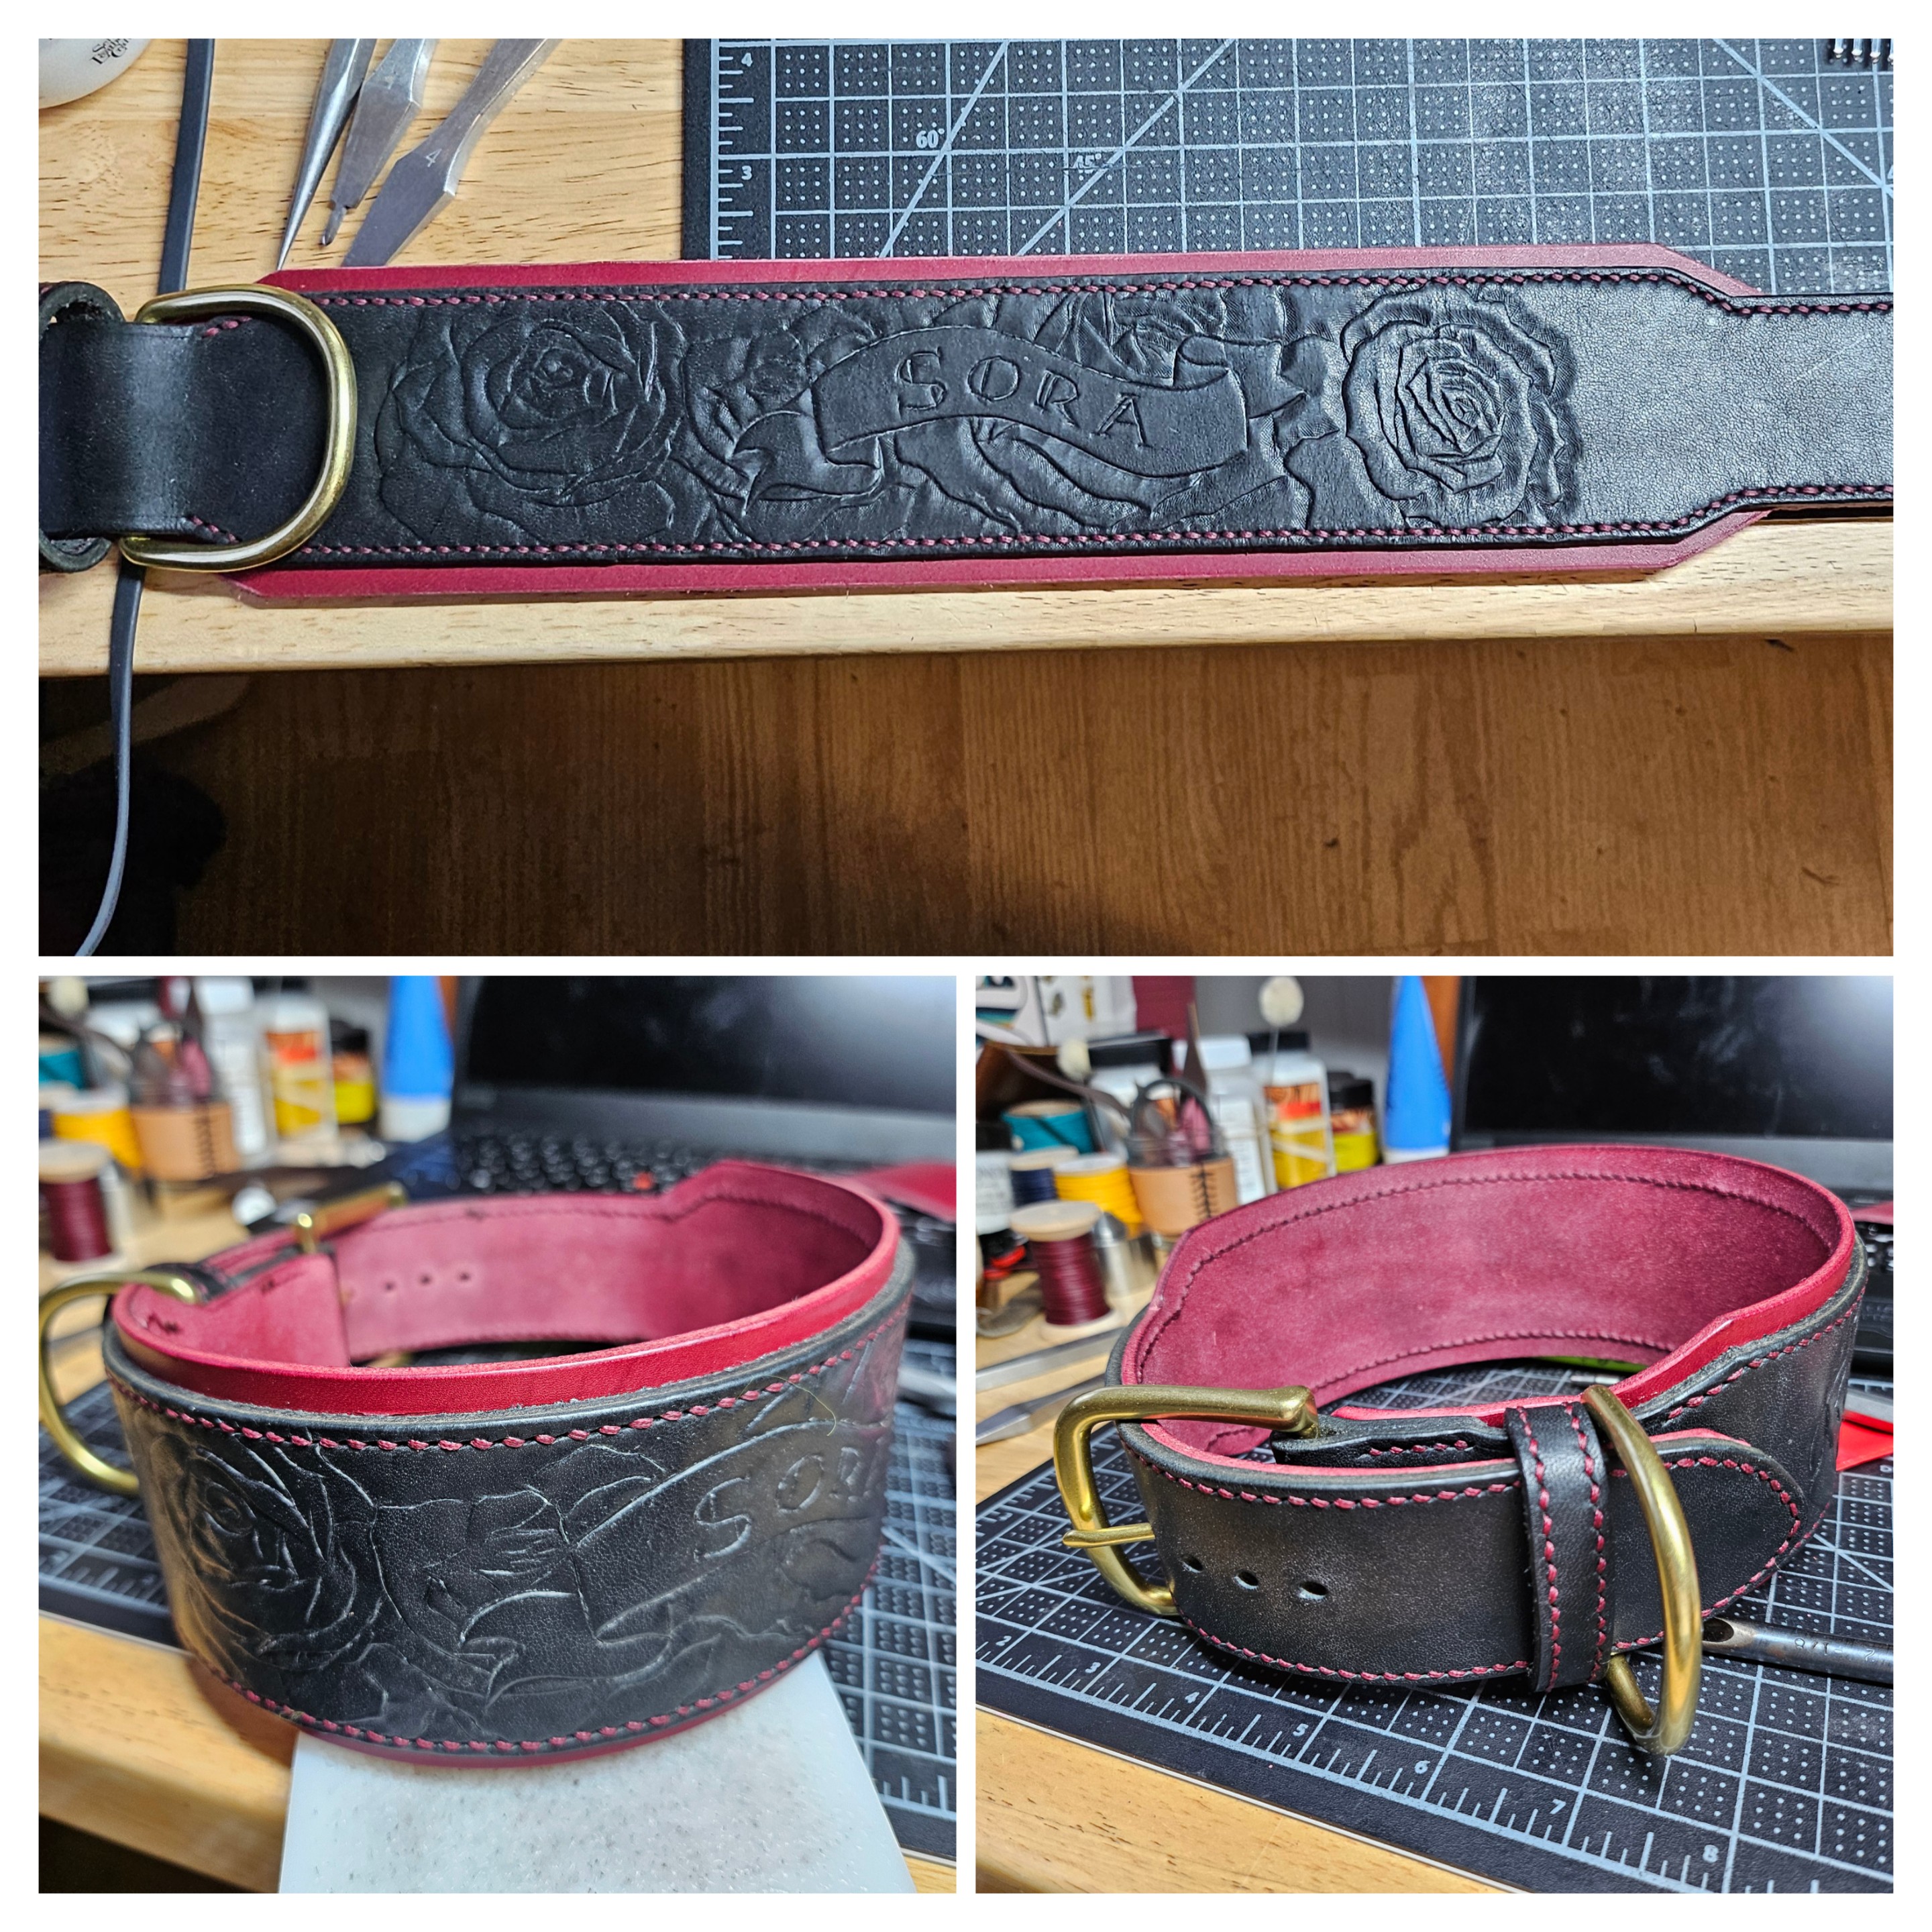 A collage showing a red and black leather dog collar tooled with roses and the name Sora. It's fully stitched with dark red stitching and has brass hardware.